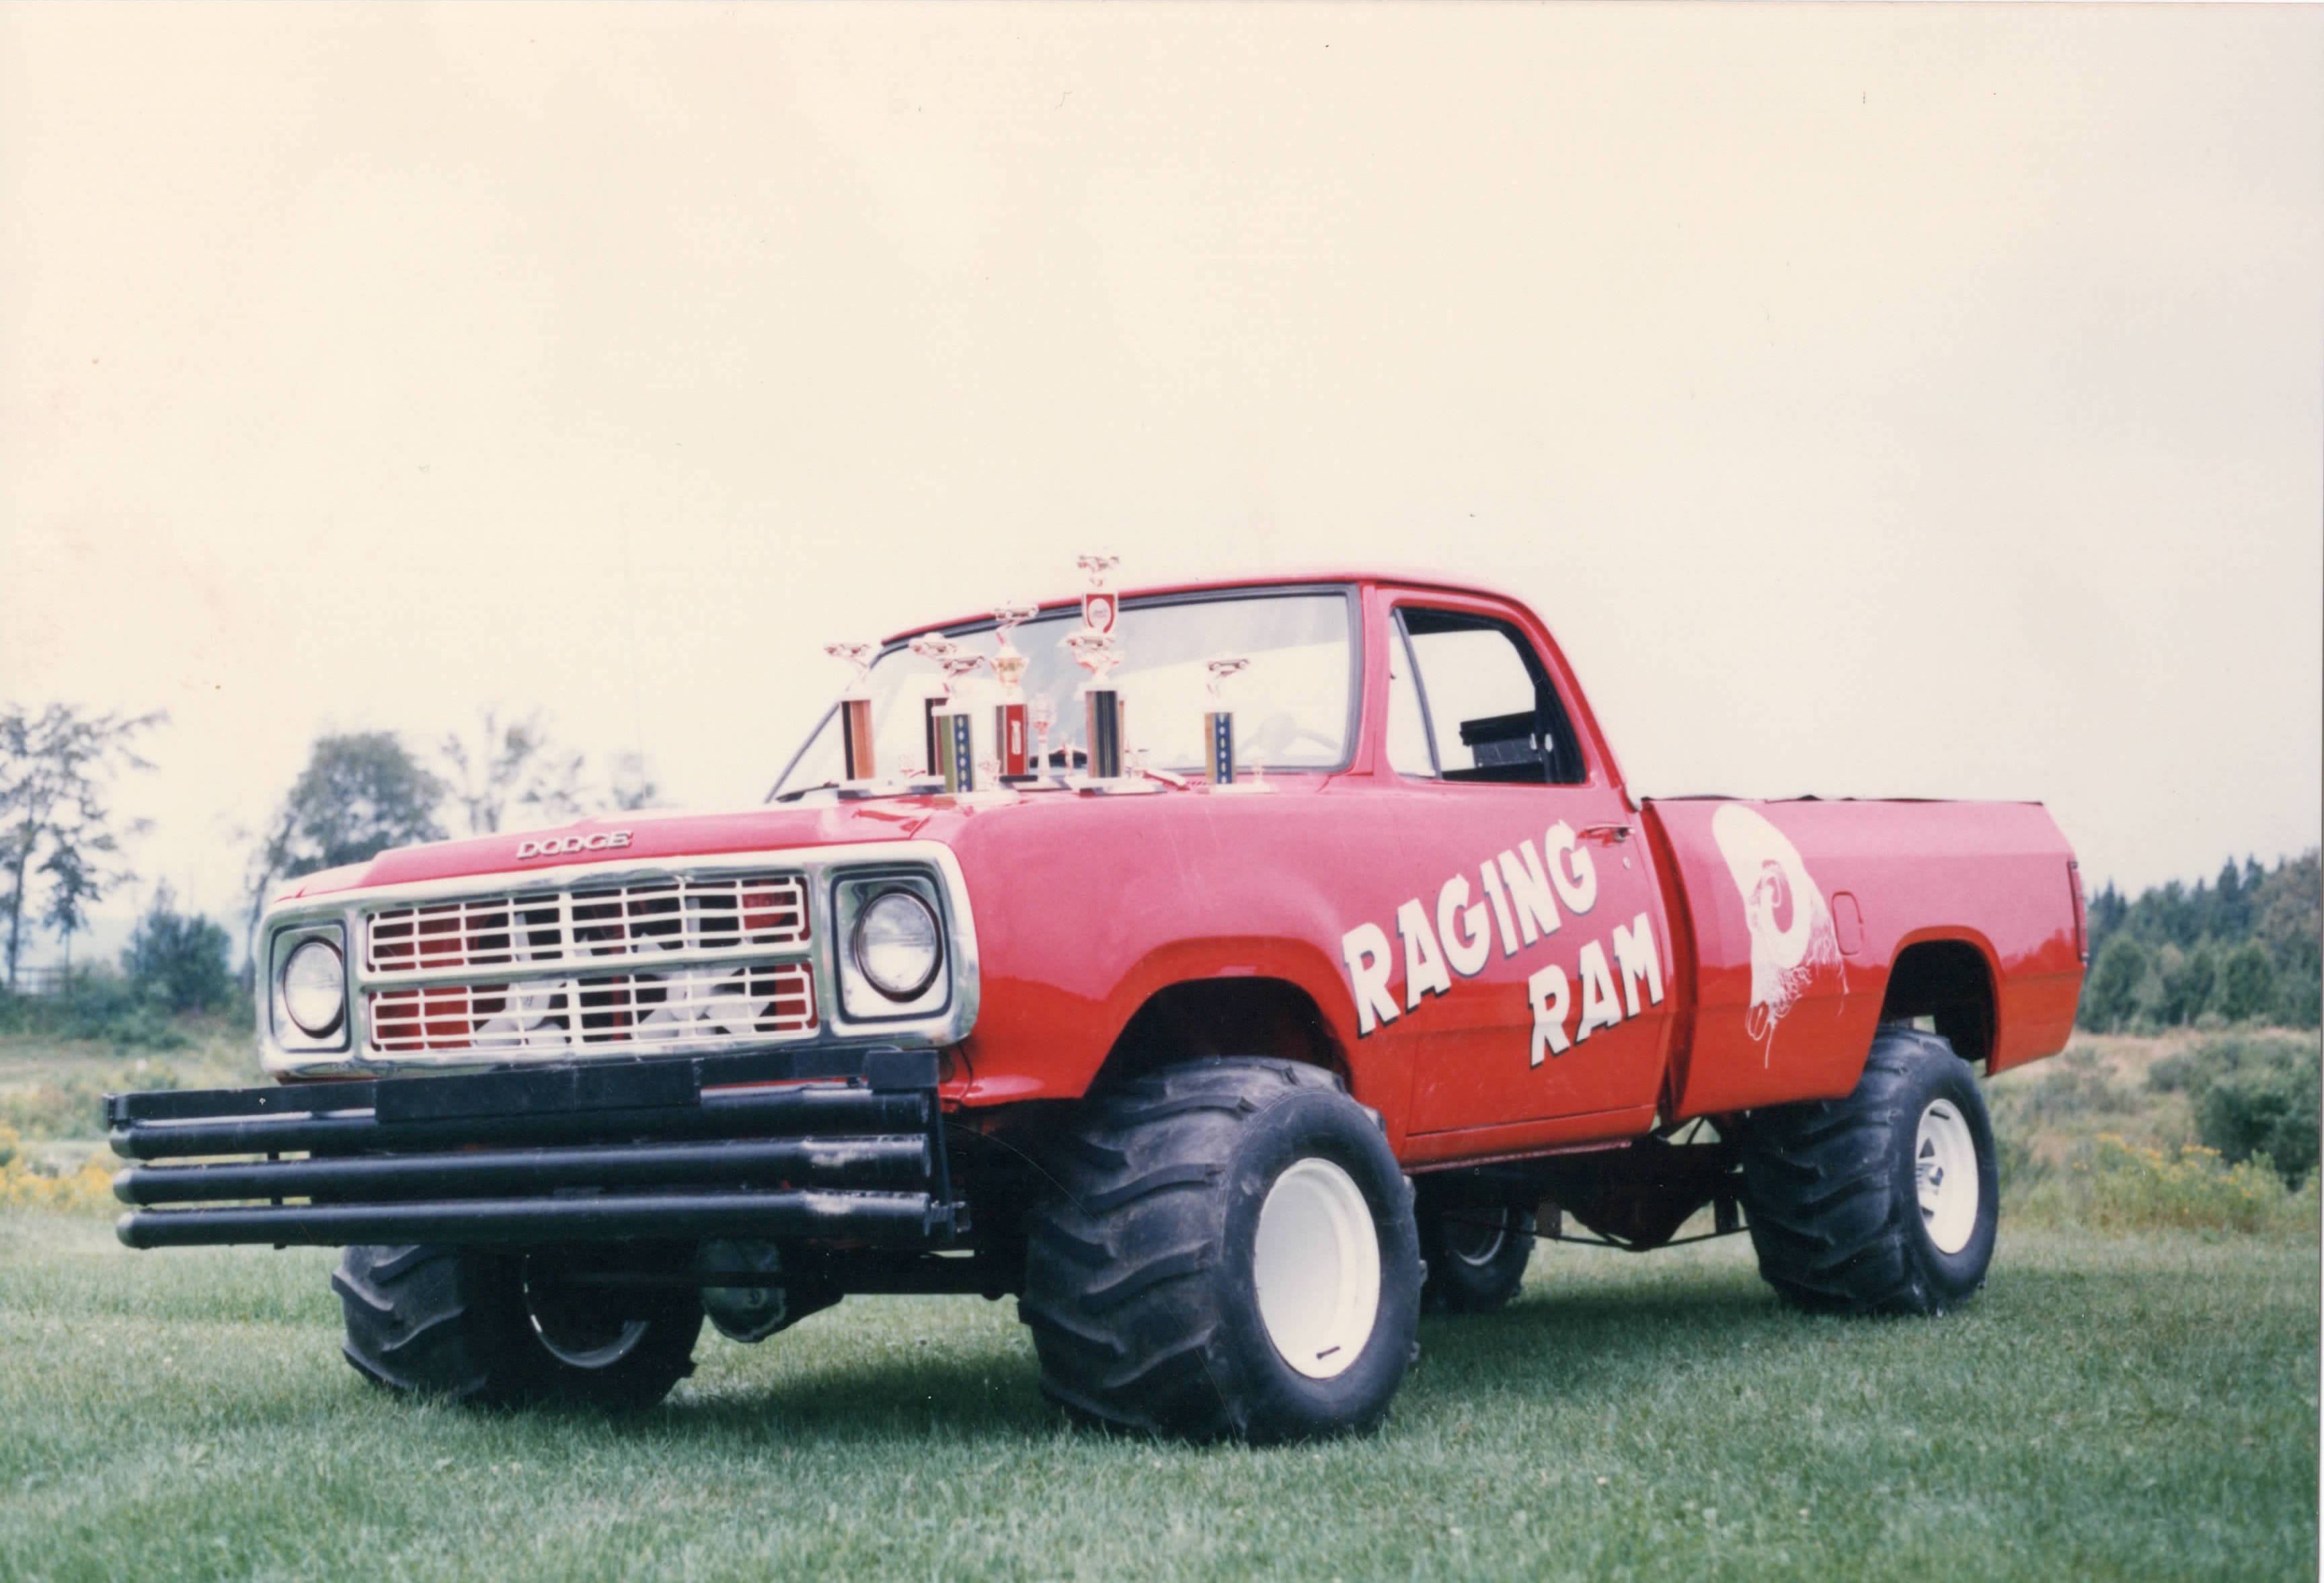 Attached picture 1989 Raging Ram 1976 Truck.jpeg